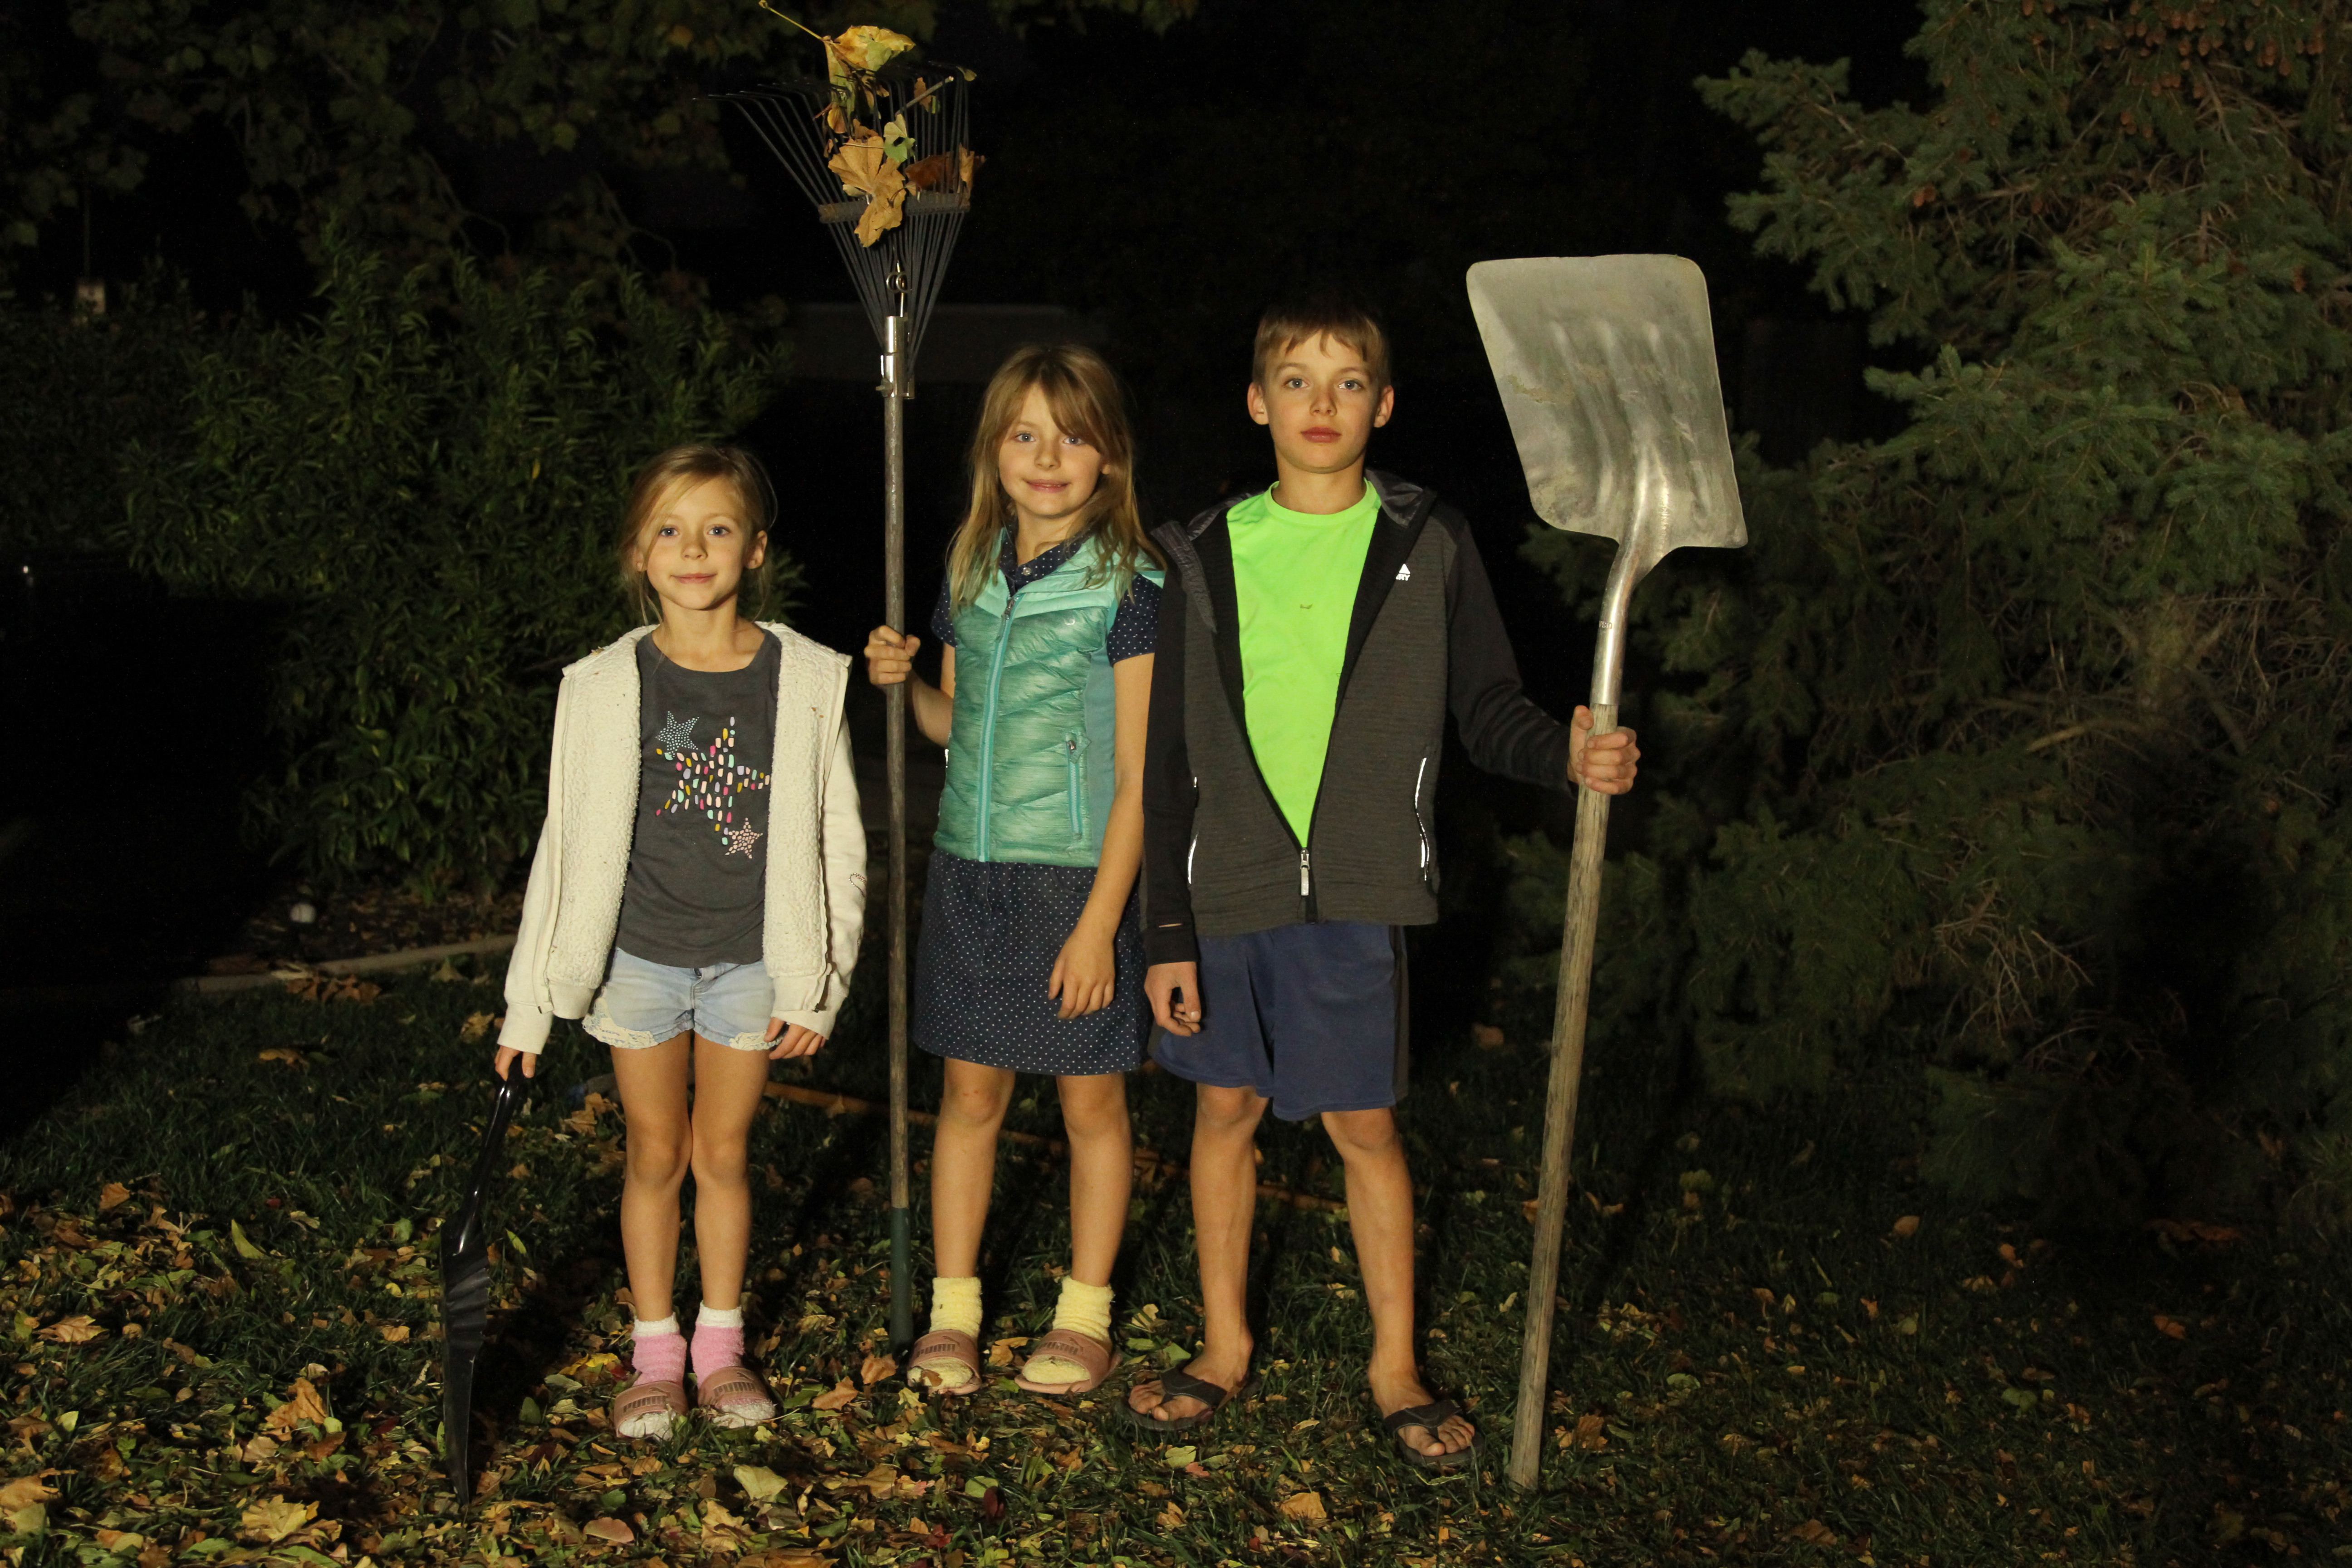 3 kids raking leaves in the fall posing with rakes and shovels